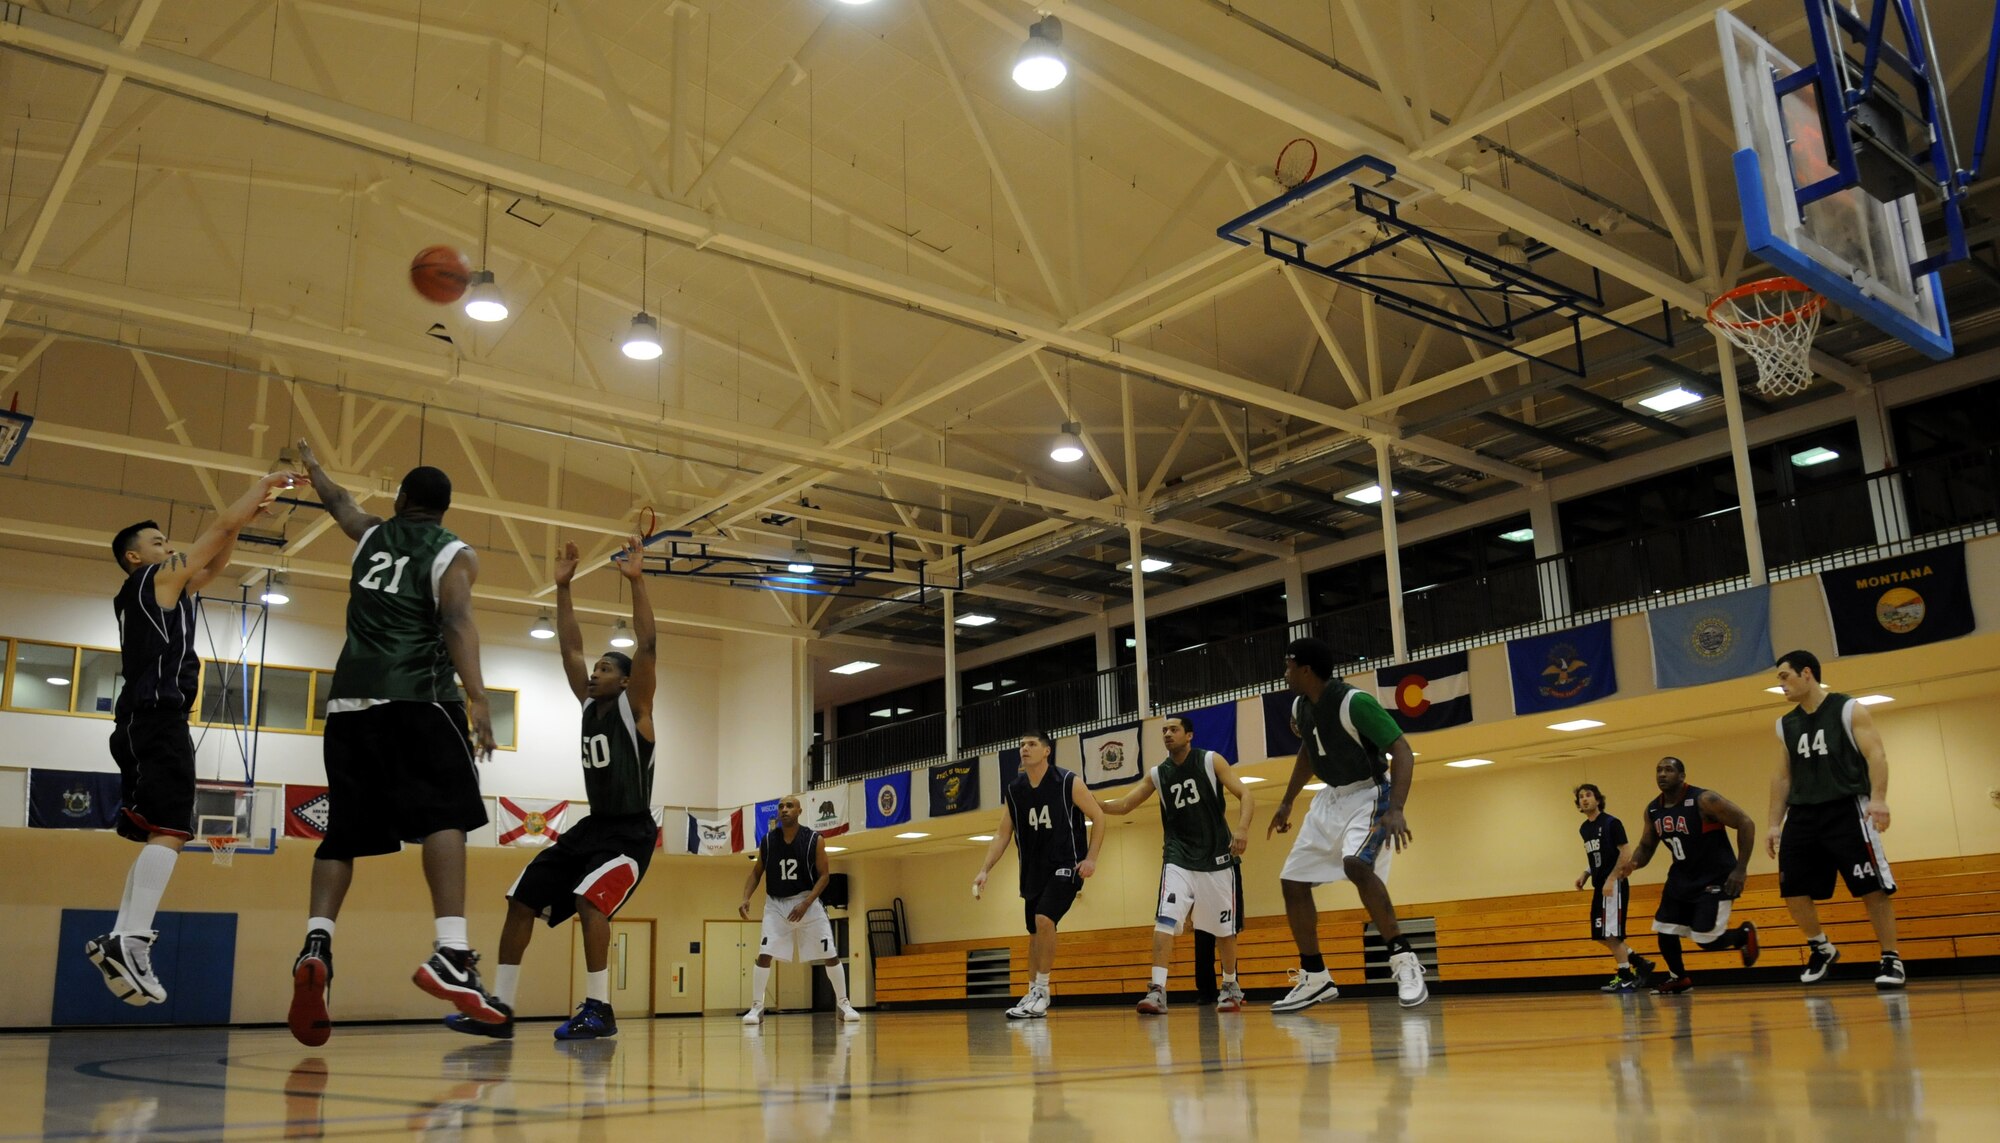 RAF MILDENHALL, England – Johnny Inlavong, 488th Intelligence Squadron, spots up a three-point attempt over Daniel Porter during the Intramural Basketball Championship game at the Hardstand Gym Feb. 18. IS wasn’t able to pull out the victory, dropping two games in a row and losing to the 100th Maintenance Group 63-55 and 61-41, making the MXG RAF Mildenhall’s 2010 Intramural Basketball Champions. (U.S. Air Force photo/ Staff Sgt. Jerry Fleshman)